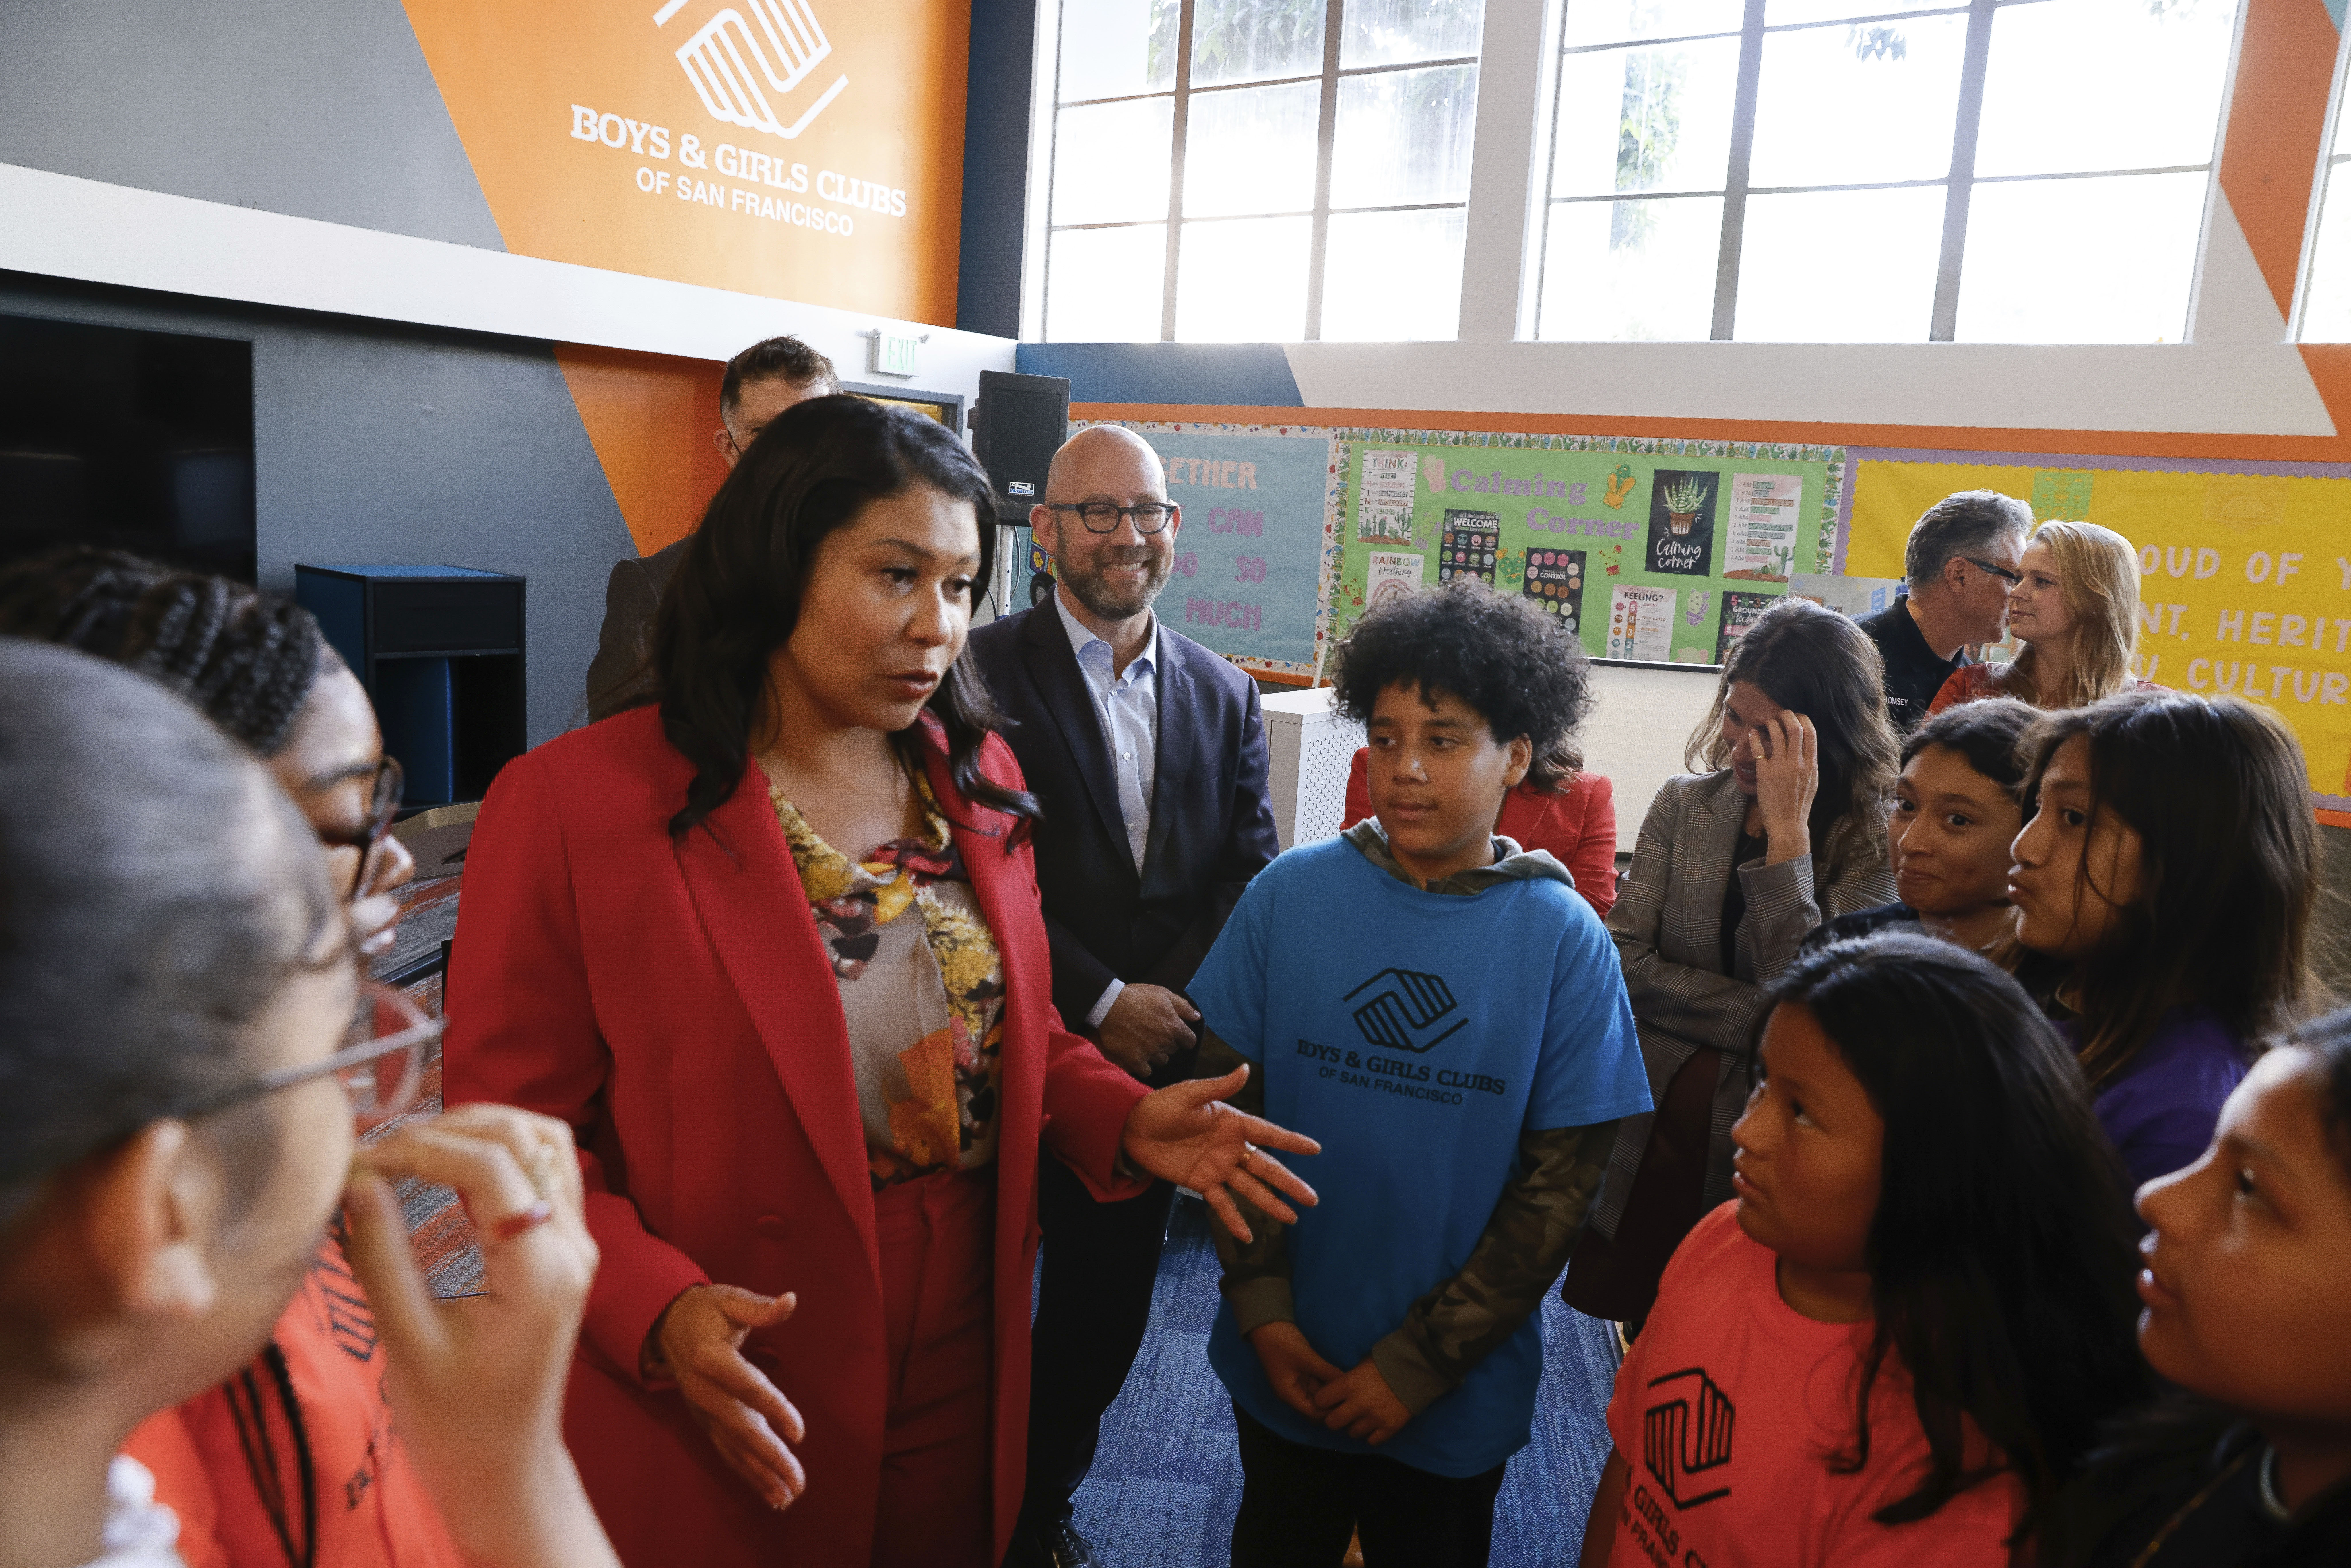 San Franciso Mayor London Breed talks with members of the Boys and Girls Clubs of San Francisco after speaking at a press event at the Boys and Girls Clubs of San Francisco Columbia Park Clubhouse during after-school programming to talk with children about how the Emergency Weather Resilience Program equipment will help keep them comfortable, safe, and healthy during extreme heat or poor air quality, on Wednesday, Sept. 20, 2023, in San Francisco. Photo credit: Lea Suzuki/San Francisco Chronicle via The